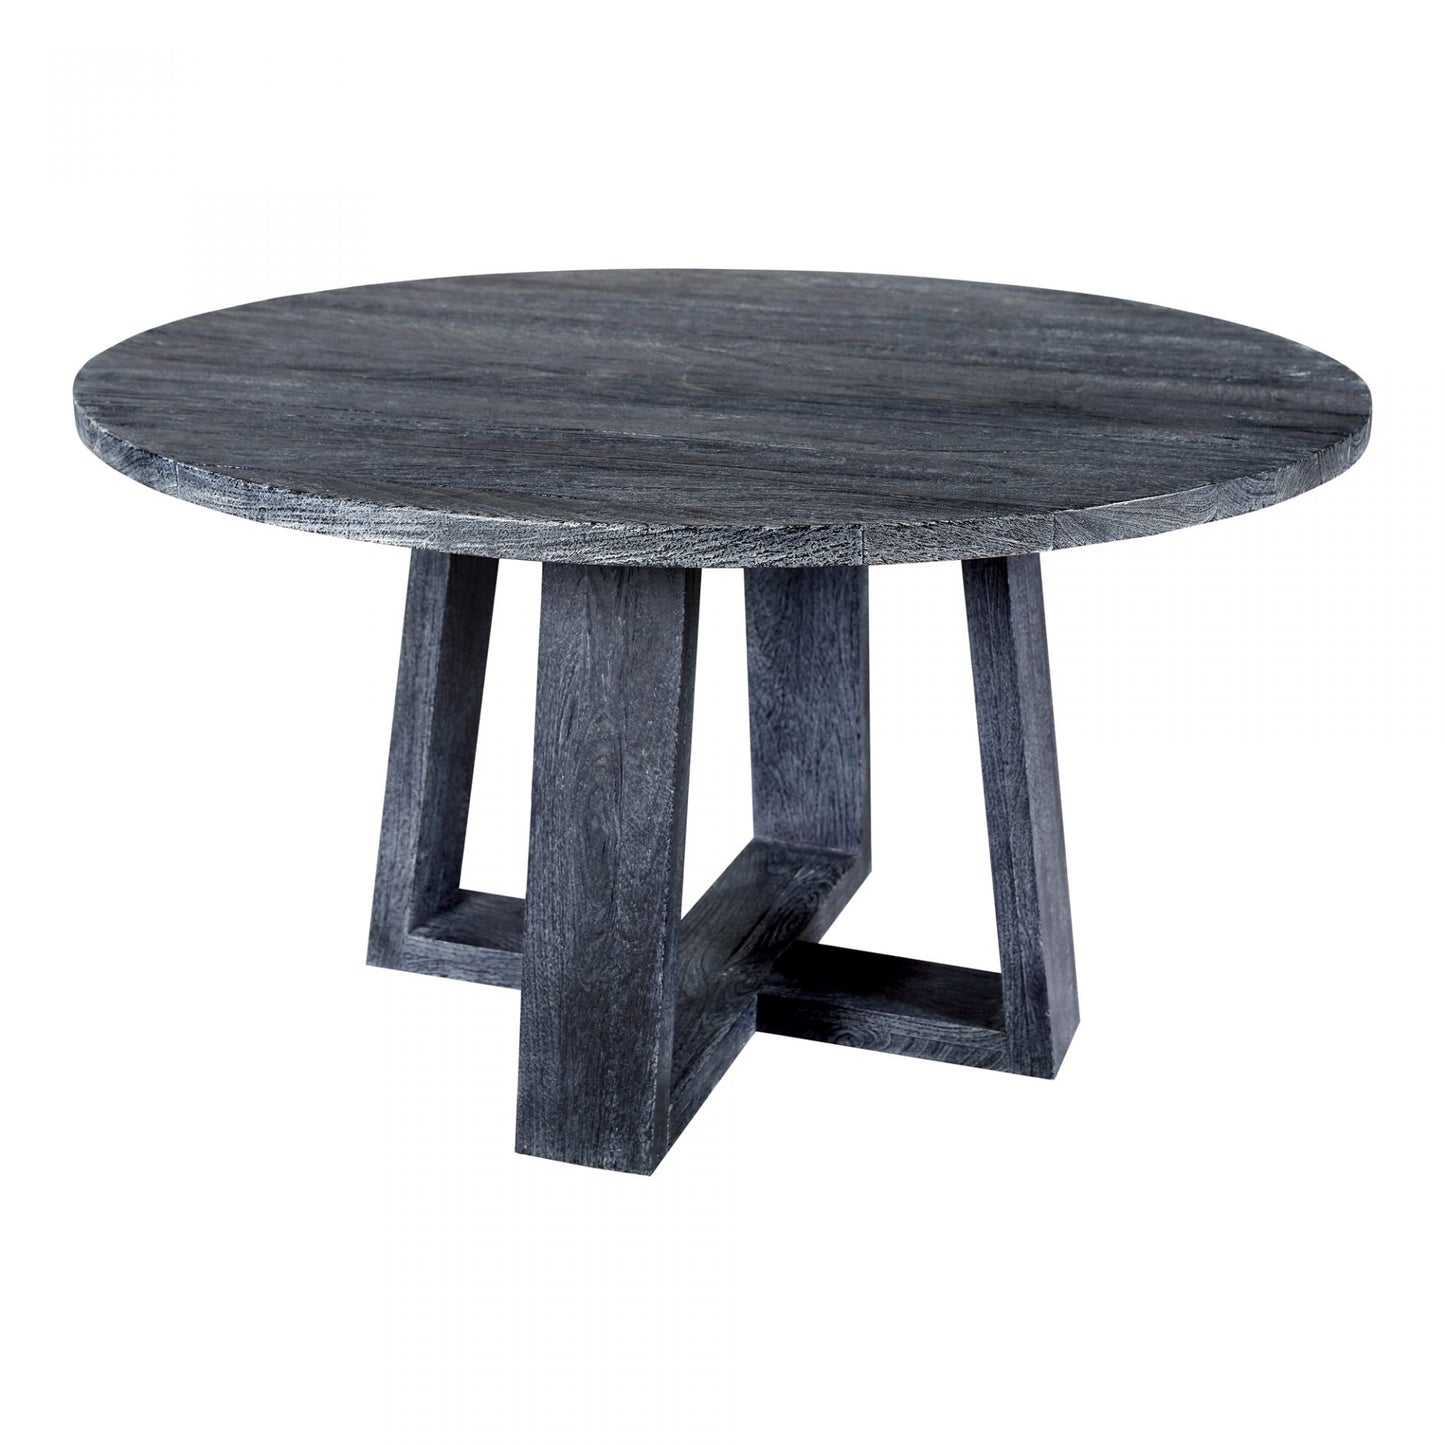 Tanya Round Dining Table Black